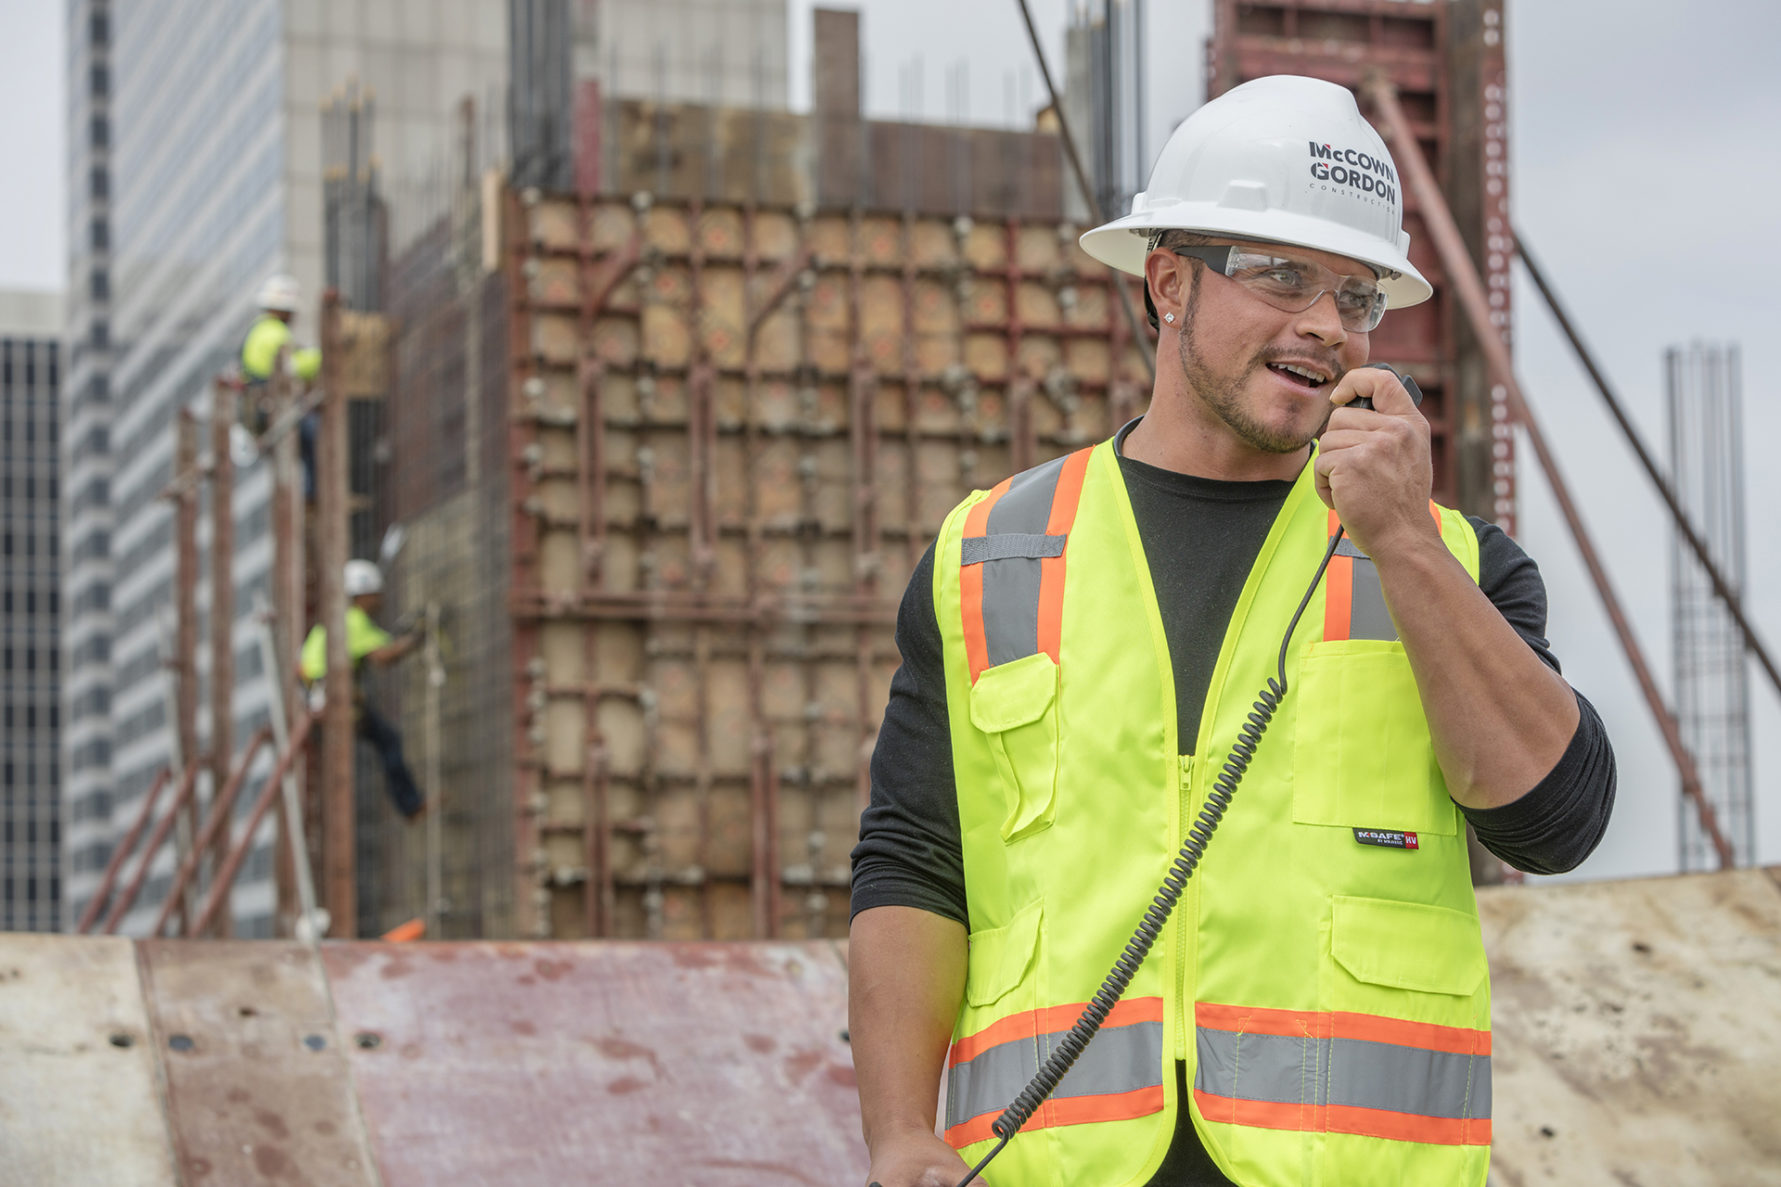 McCownGordon construction worker contacting someone